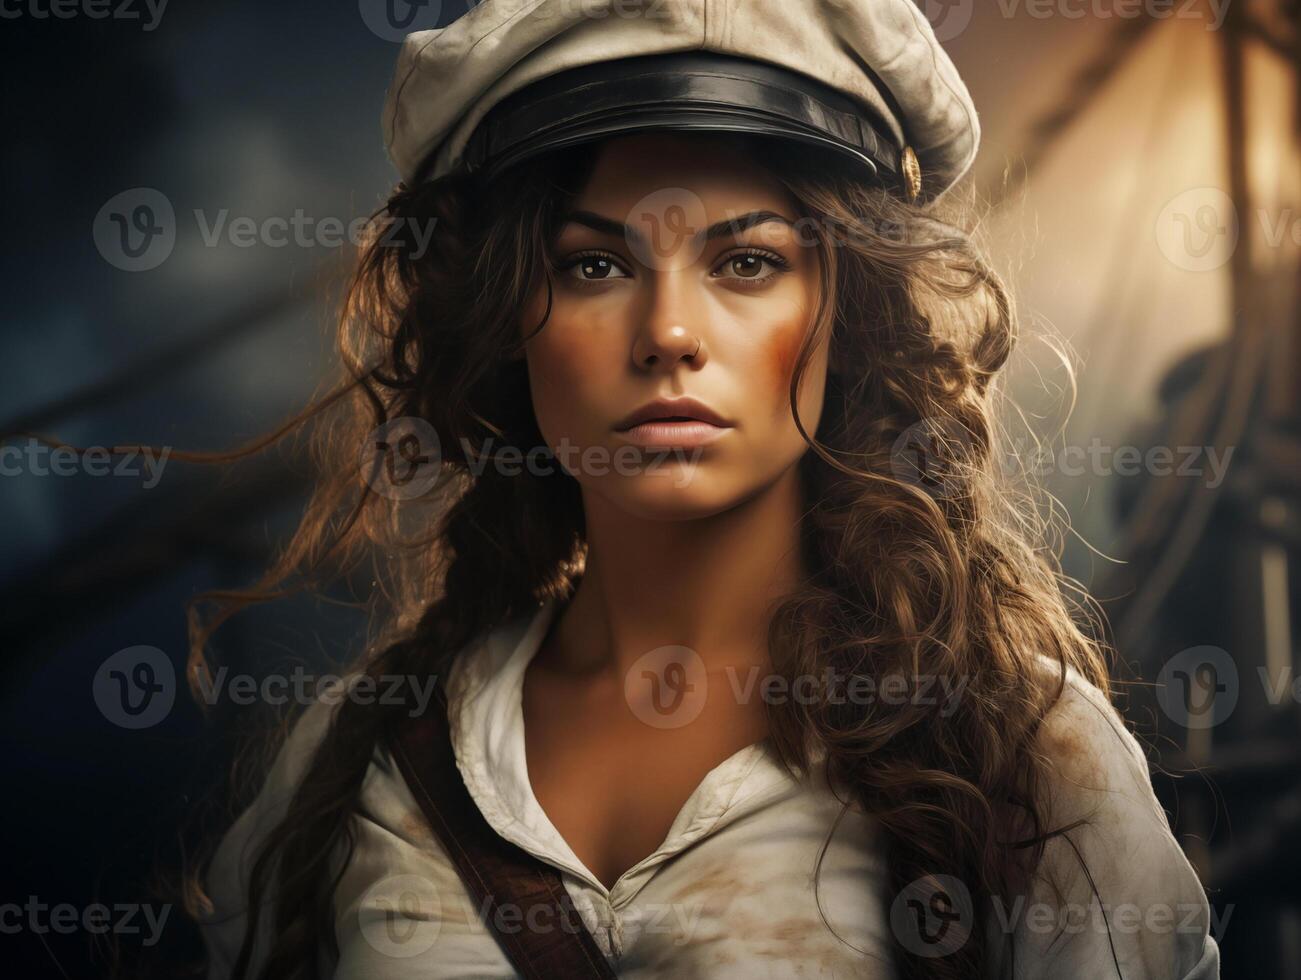 Female sailor at work close-up. Woman career concept photo